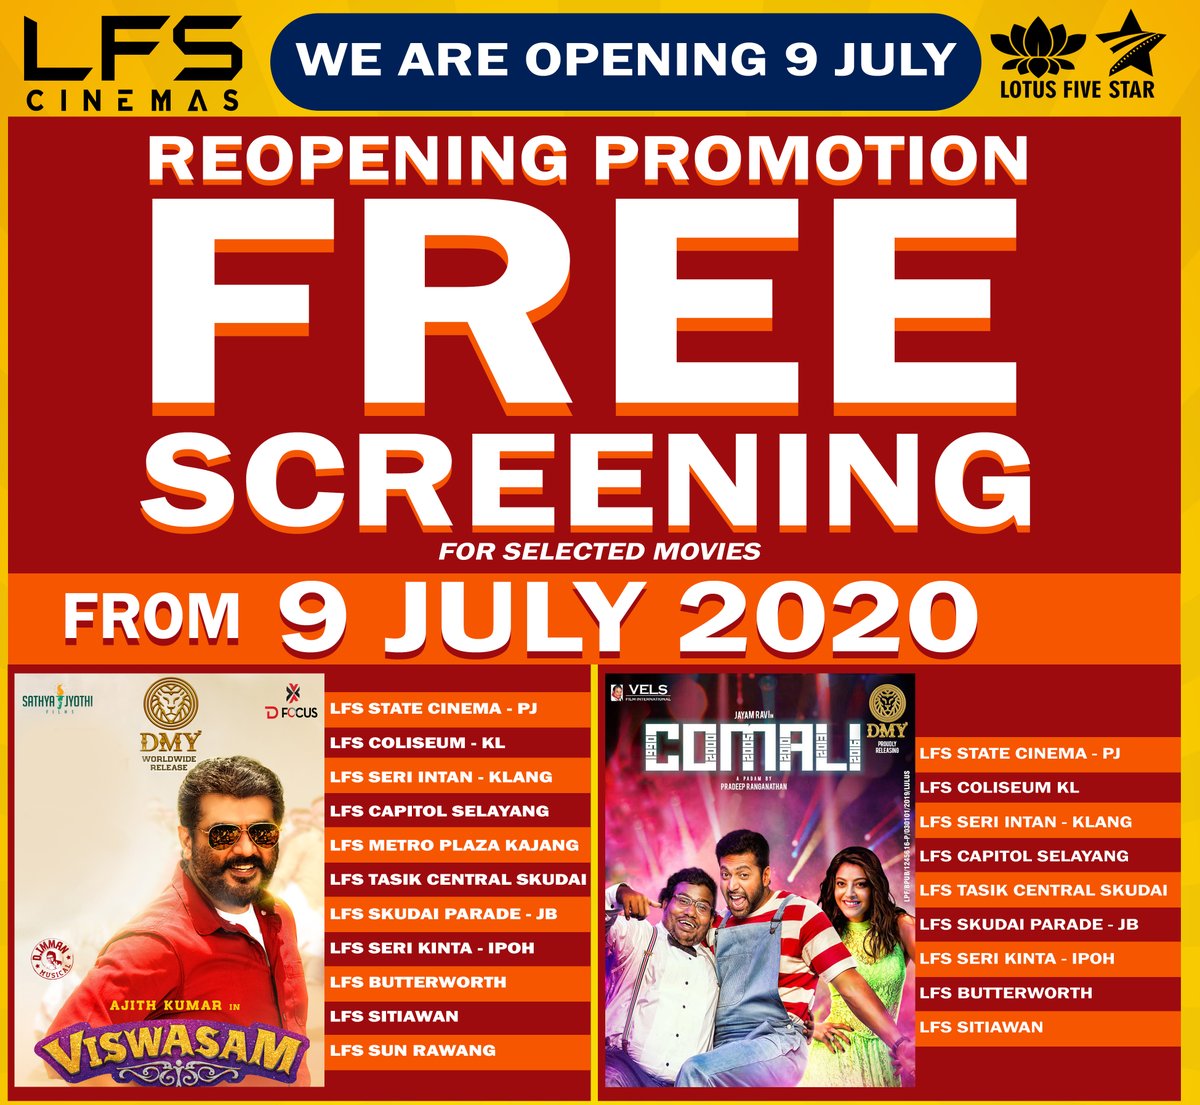 Here's #LotusFiveStar reopening movies with FREE Screening as we welcome you all back to our #LFSCinemas.

Once again Thala #Ajith's Viswasam and #JayamRavi's Comali going to entertain all of us again.

#LotusFiveStarAV #FreeScreening #Viswasam #Comali